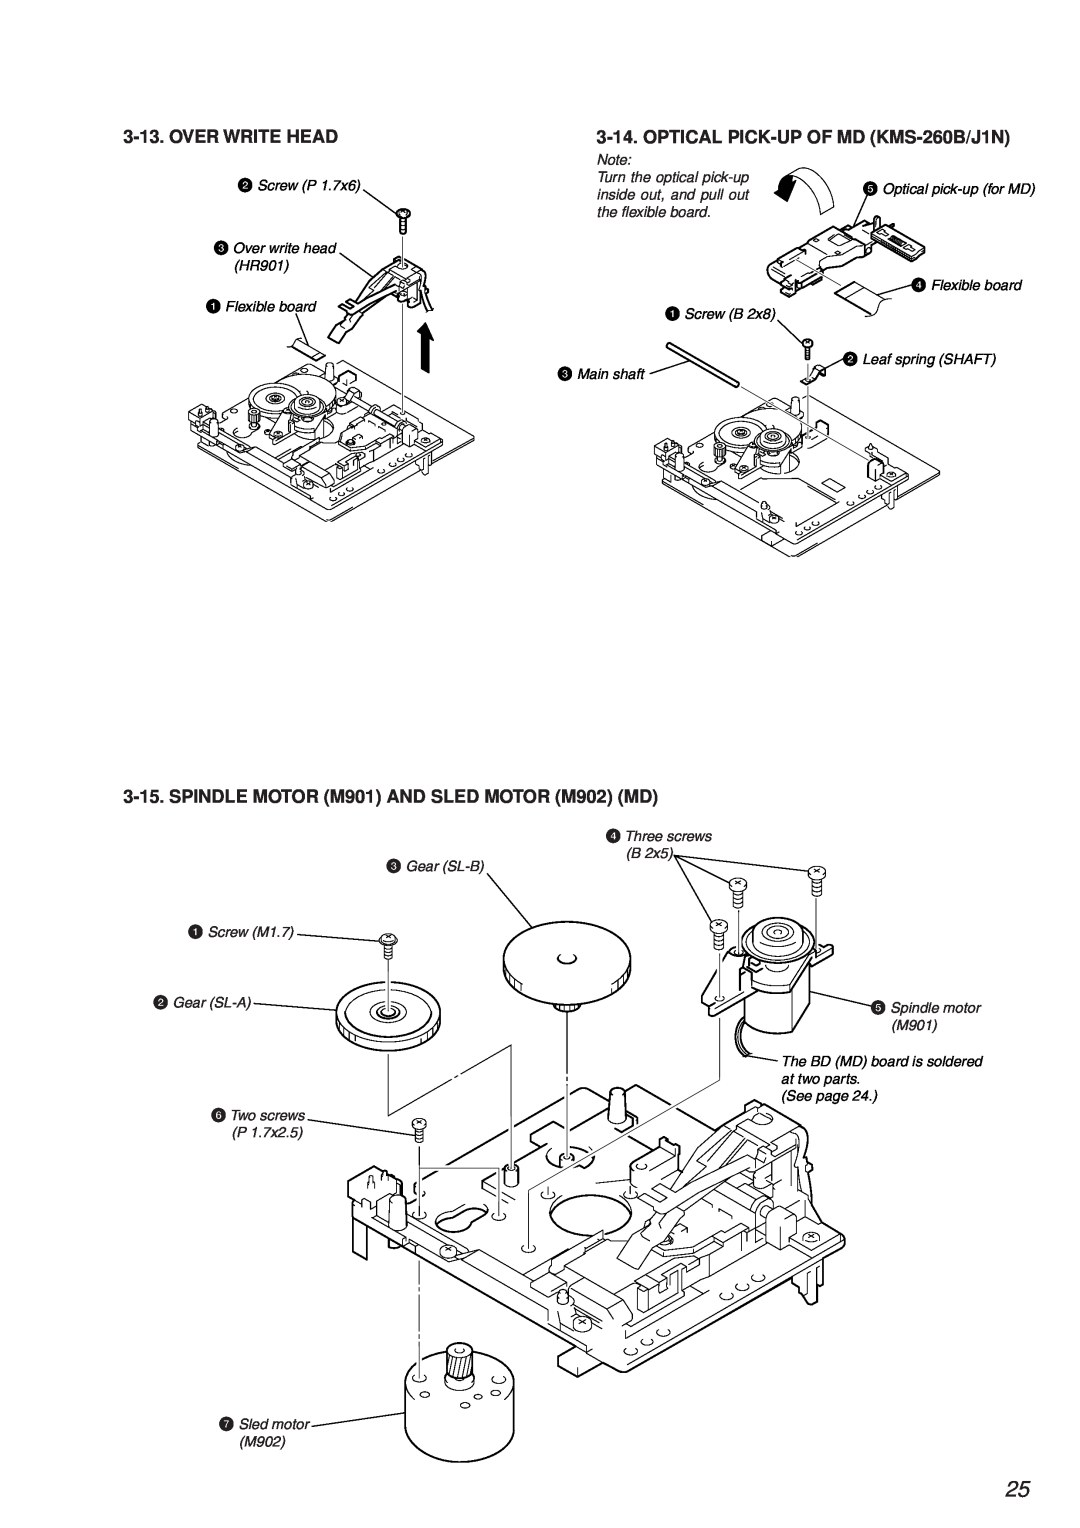 Sony HCD-MD373 service manual Over Write Head, OPTICAL PICK-UPOF MD KMS-260B/J1N, SPINDLE MOTOR M901 AND SLED MOTOR M902 MD 